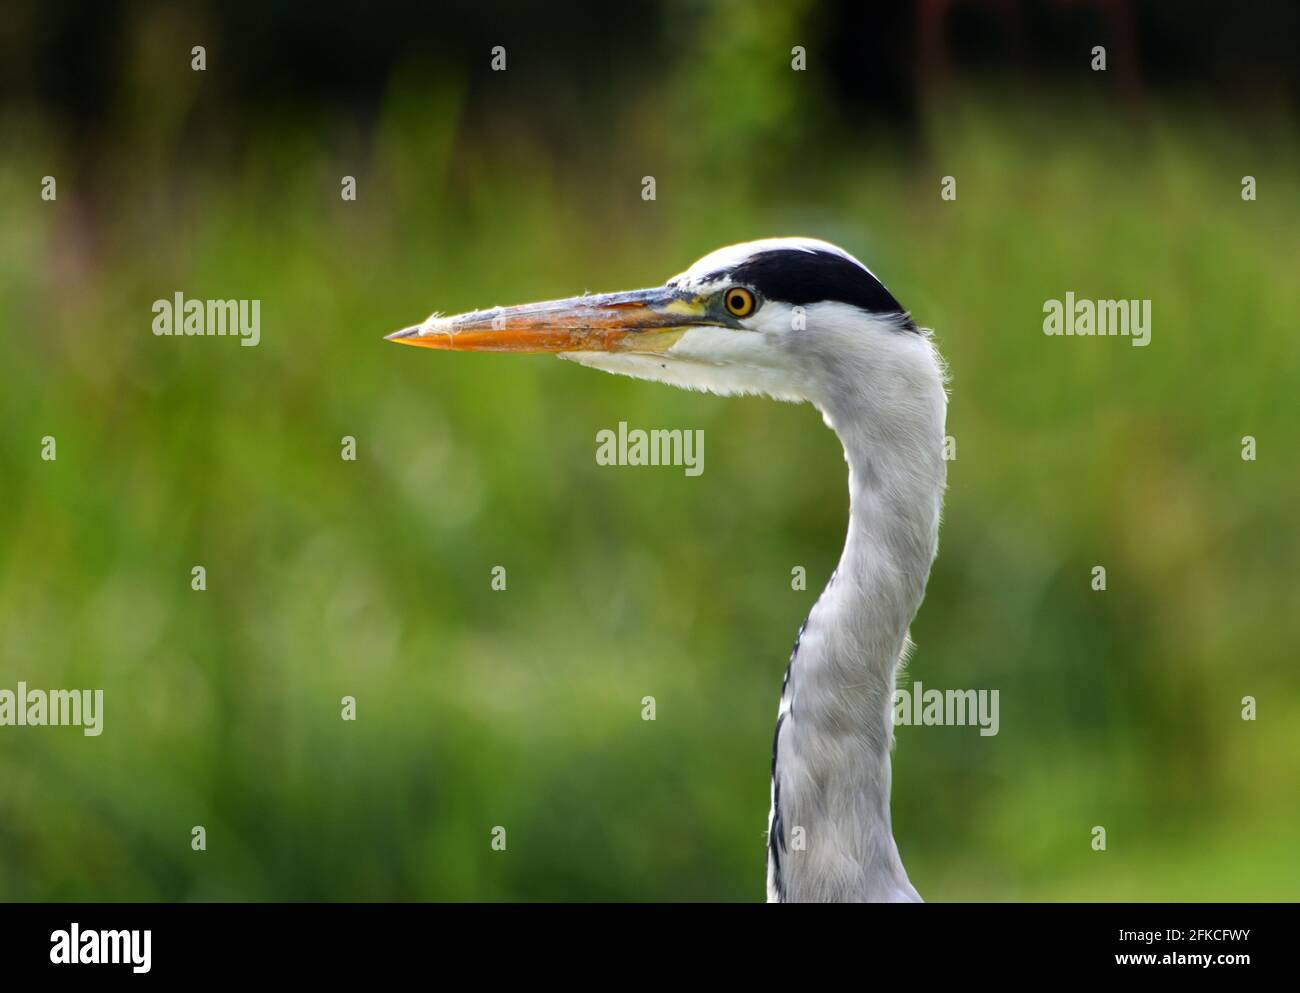 Close Up of Grey Heron head out of focus background Stock Photo